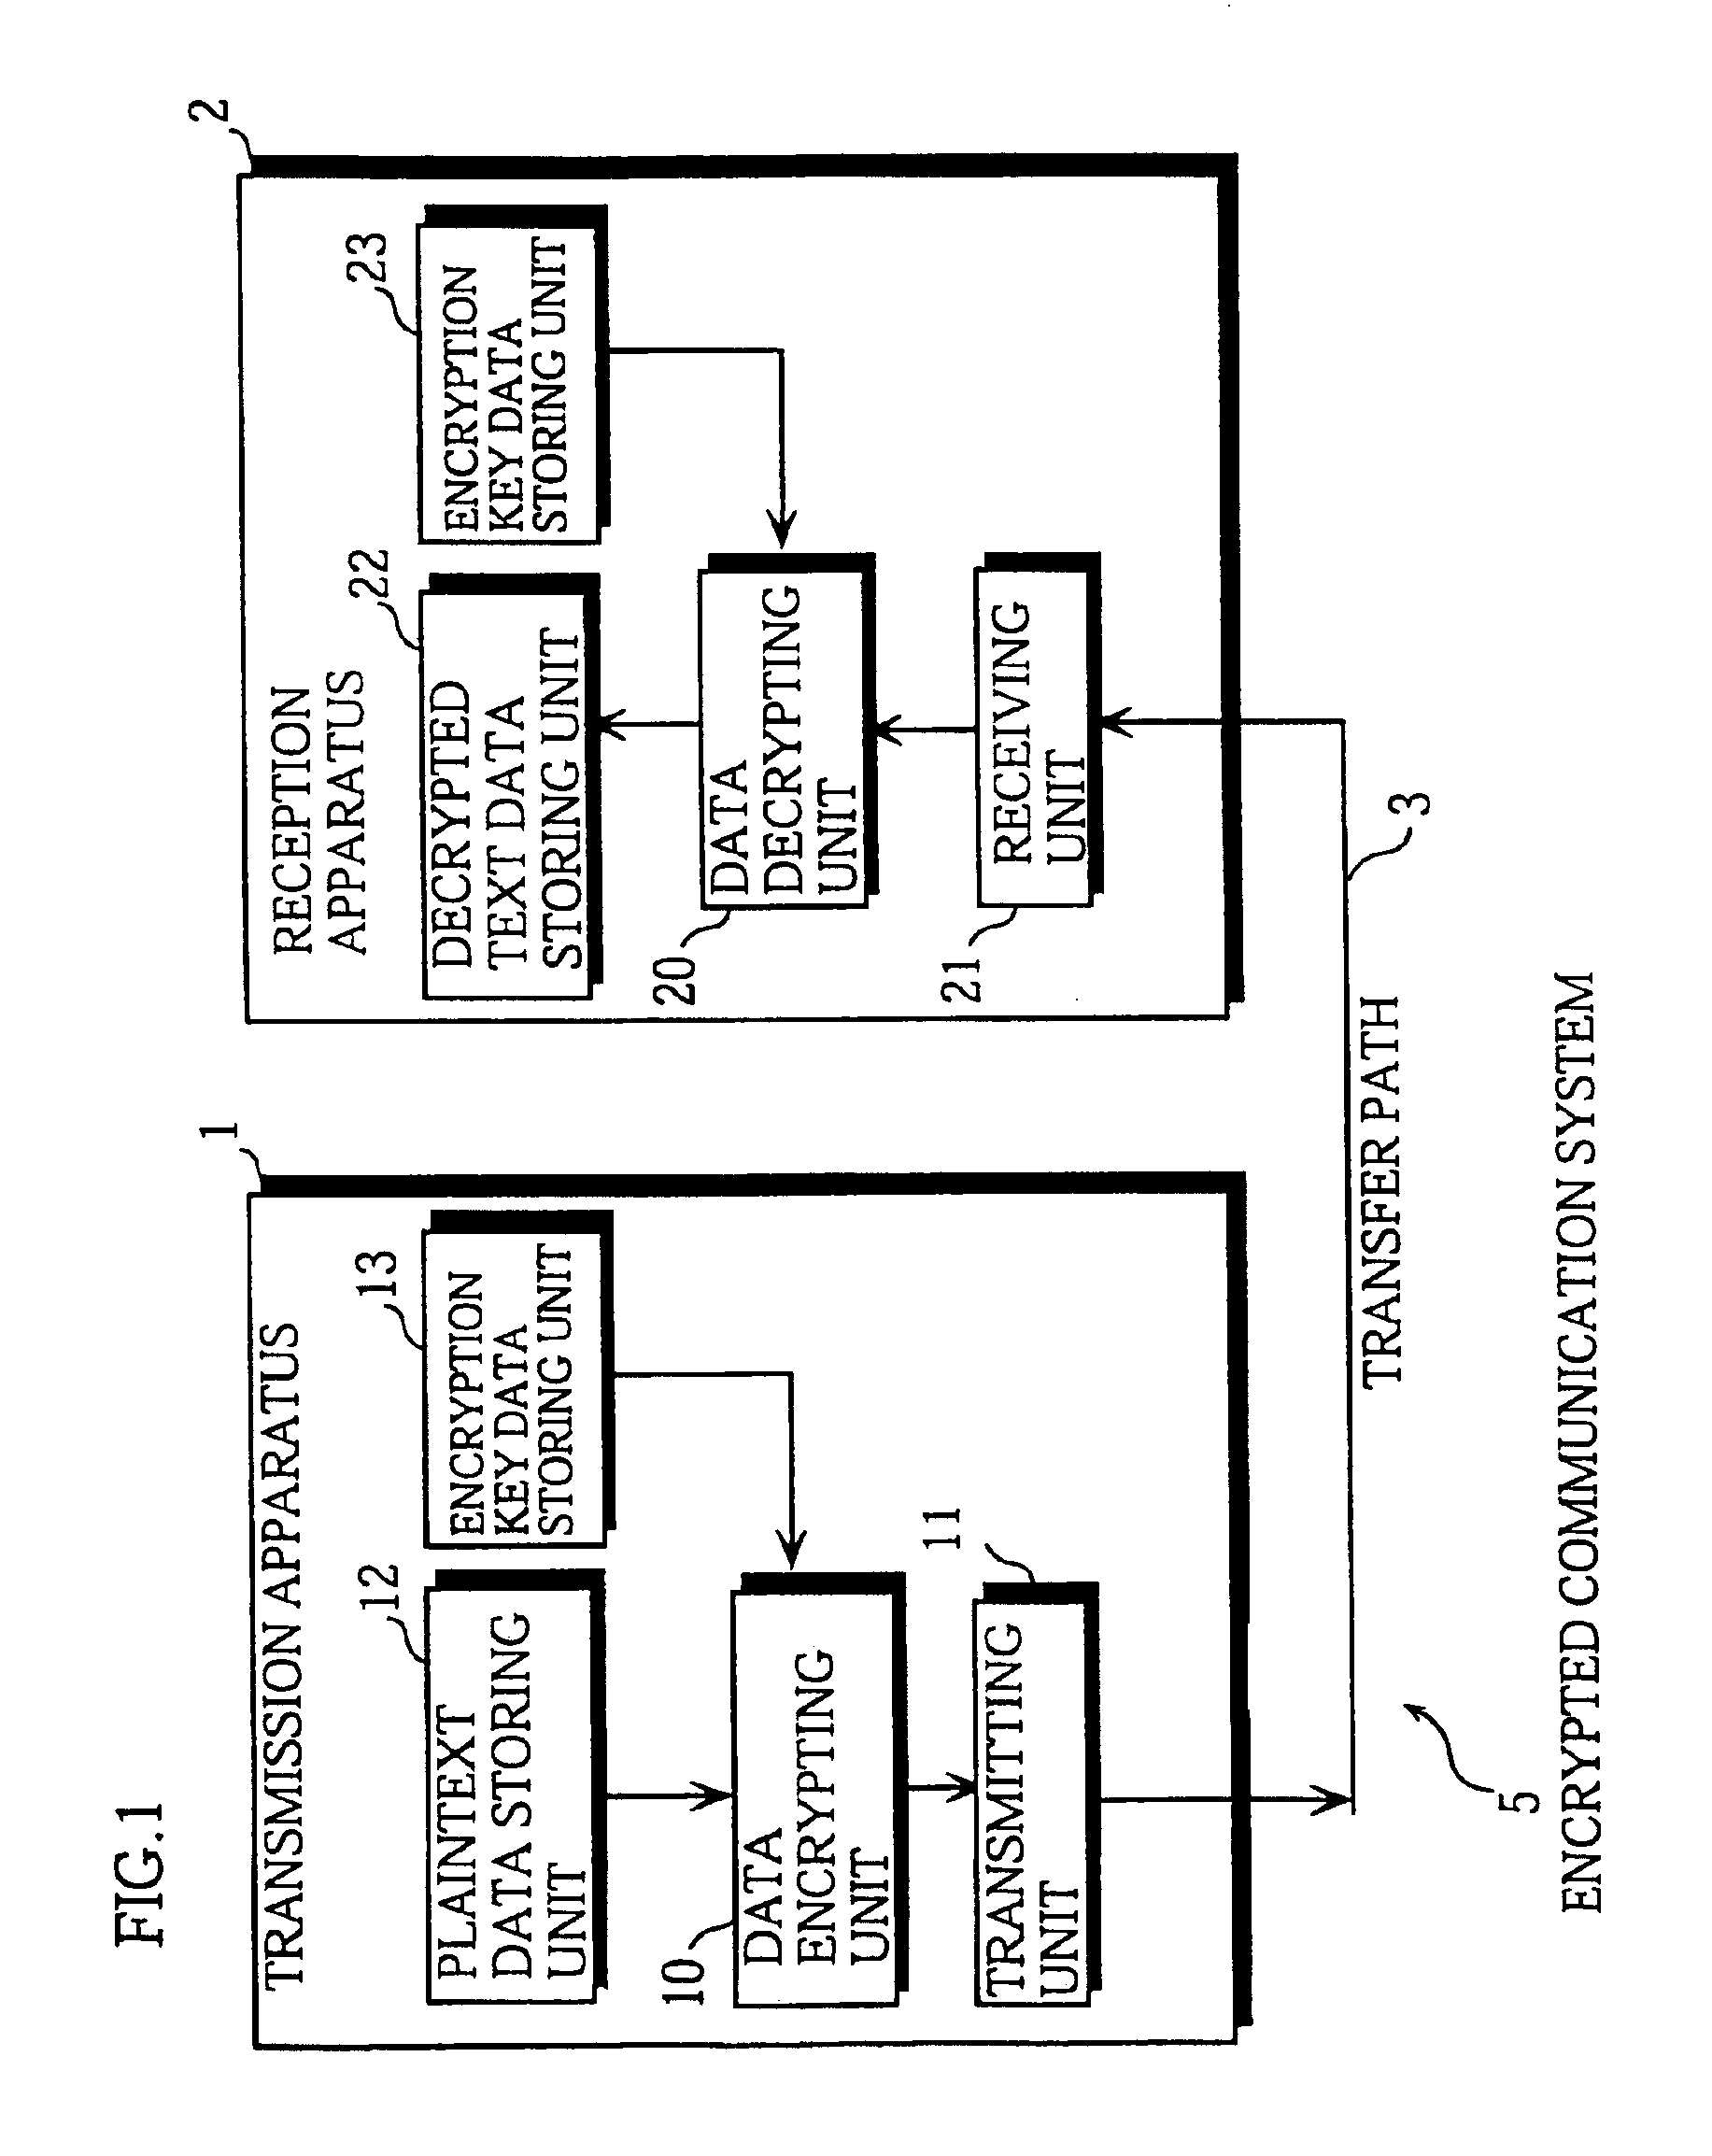 Method of encryption and decryption with block number dependant key sets, each set having a different number of keys